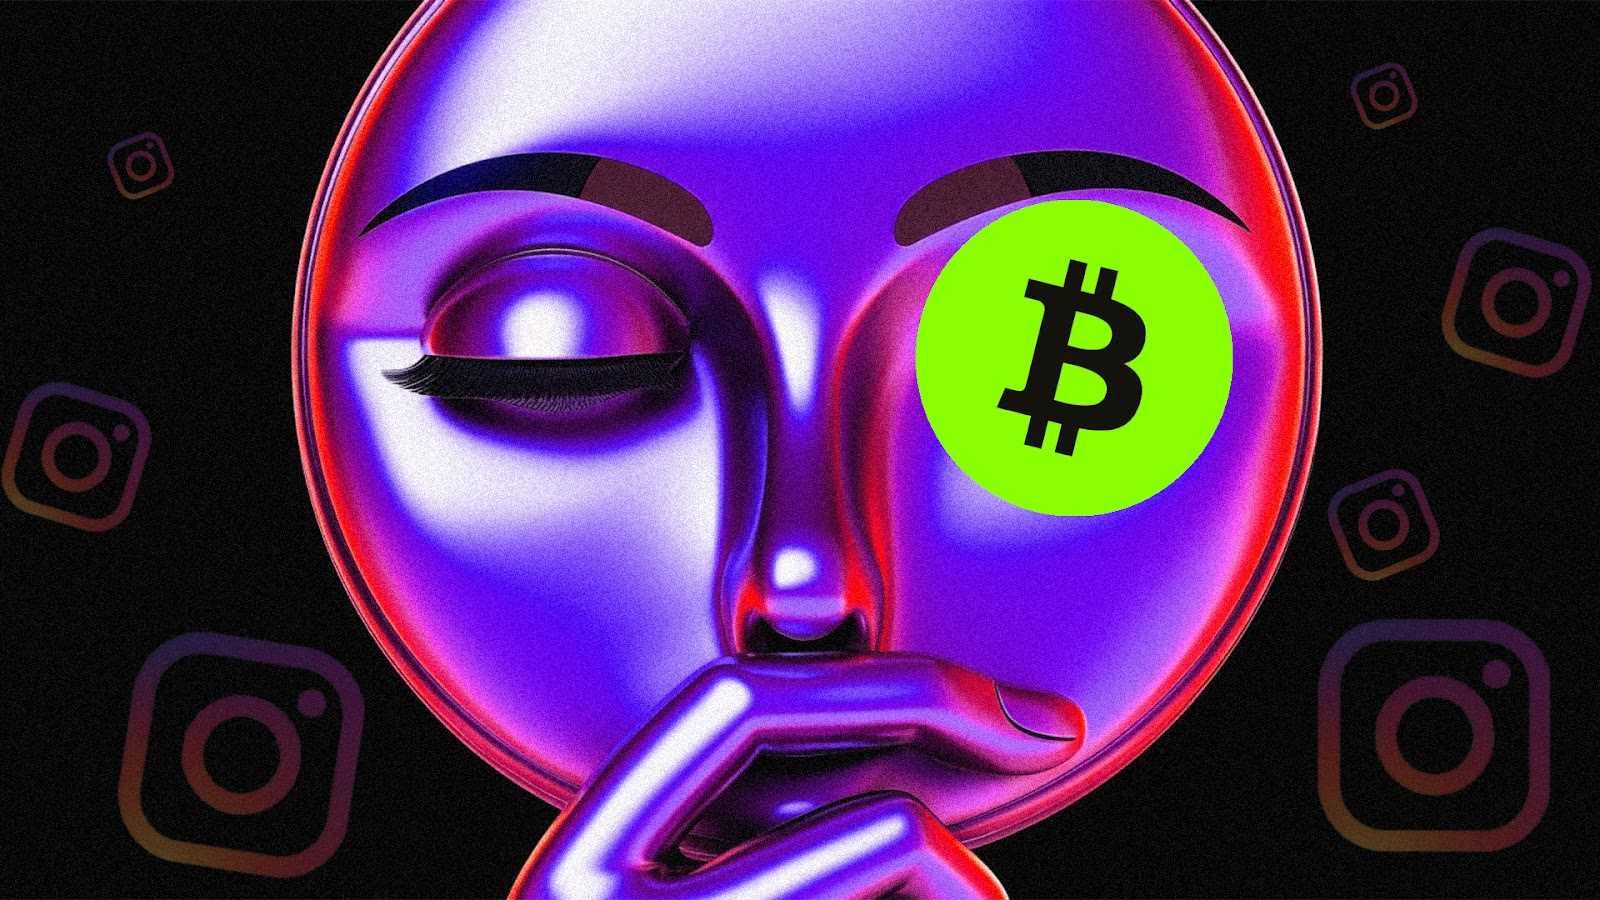 Instagram Weirdly Silences Bitcoin Discussions